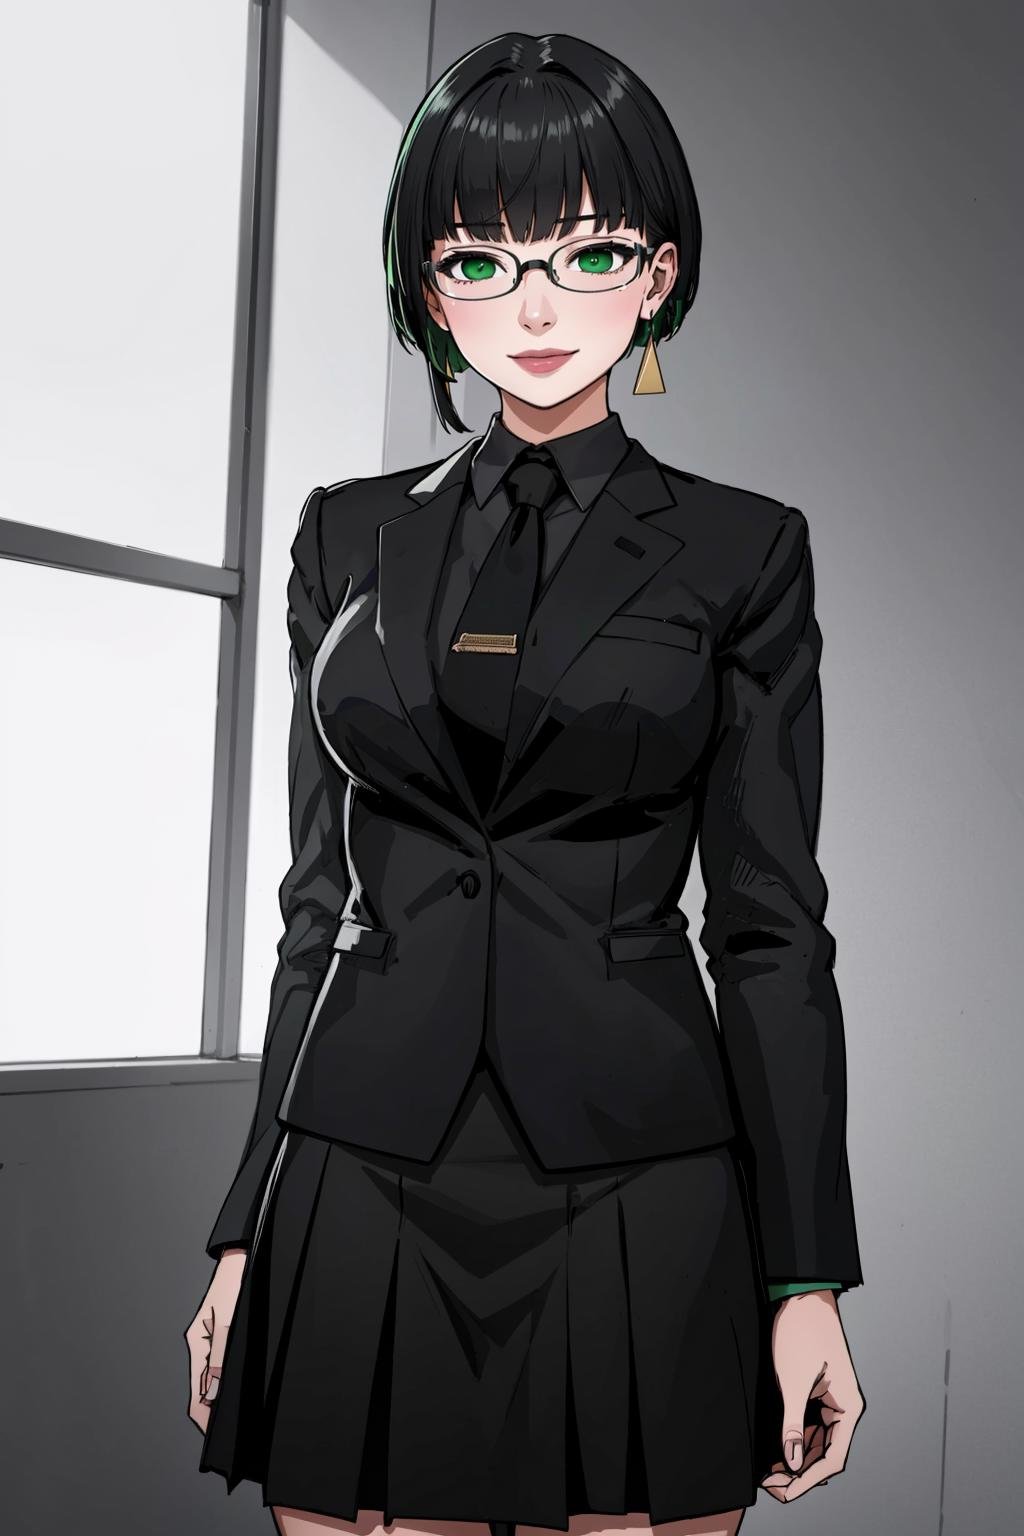 ((Masterpiece, best quality,edgQuality))smiling,solo,1girl,posing for a picture,edgAllmind,blunt bangs,two tone hair,earrings,black suit,necktie, green eyes,skirt,glasses<lora:edgArmoredCore6Allmind:0.8>